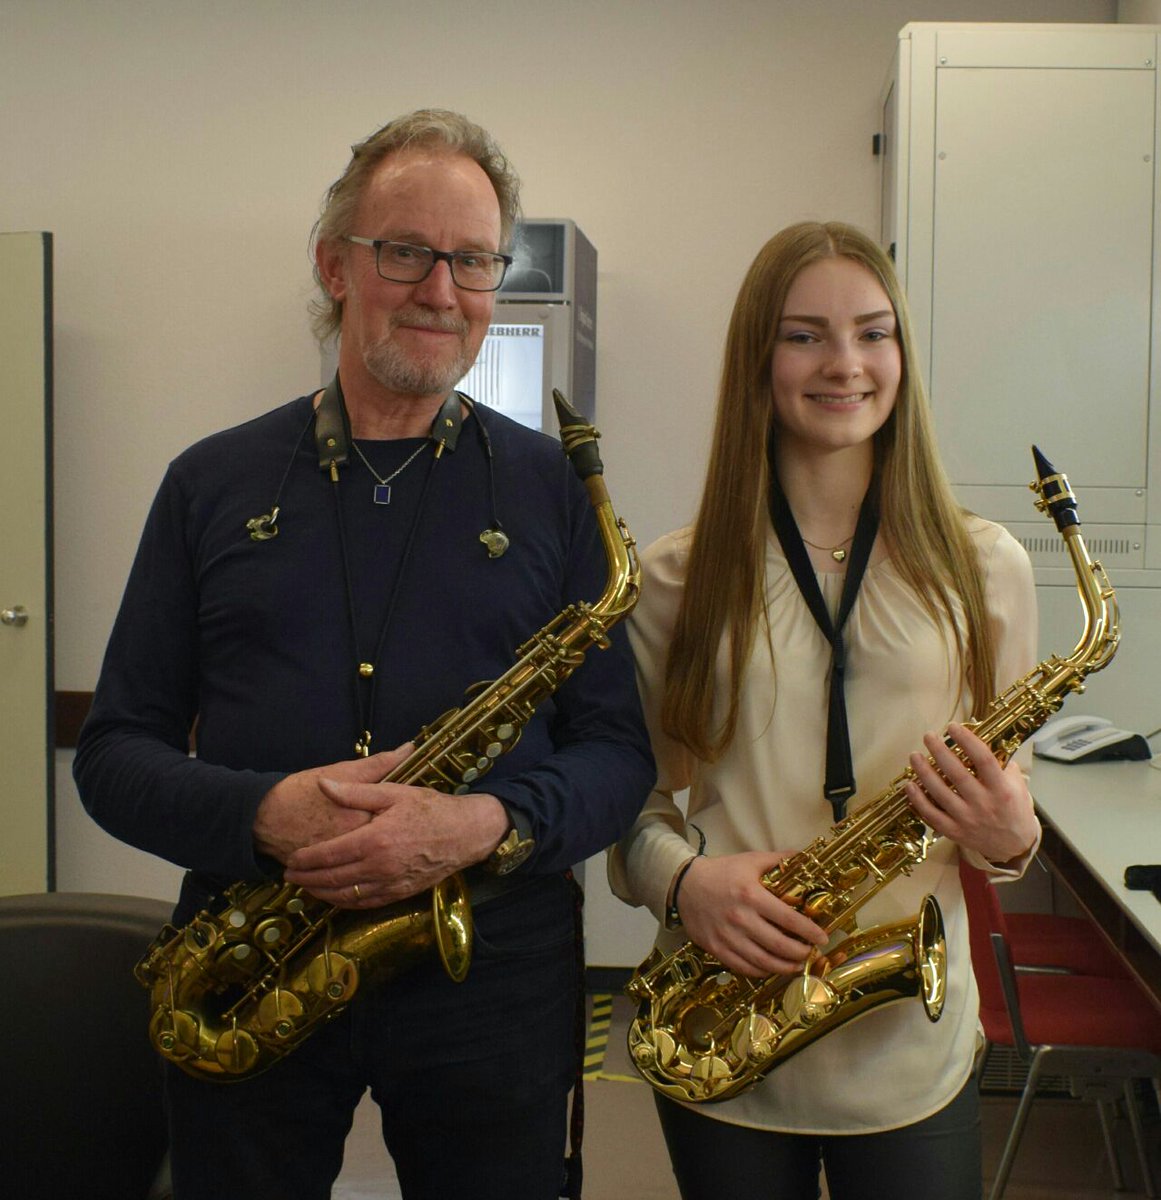 Sax lesson with John at RmC. It was great! 🎷🎷👍 #saxophone #JohnHelliwell #Supertramp #RockMeetsClassic 2018